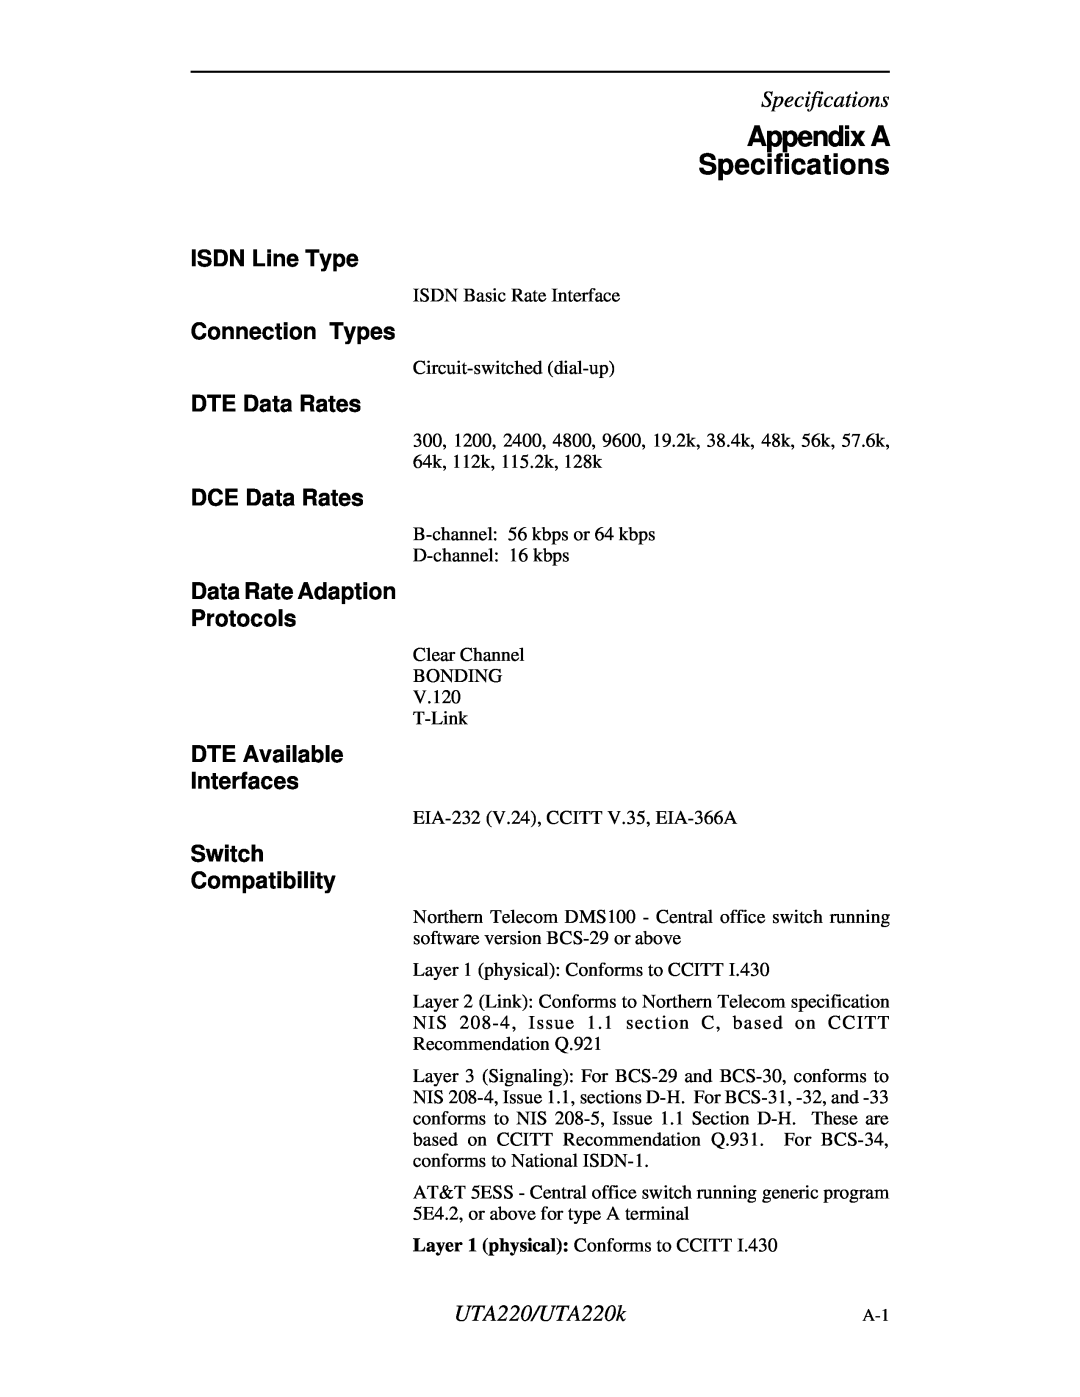 Northern UTA220/UTA220k manual Appendix A Specifications, ISDN Line Type, Connection Types, DTE Data Rates, DCE Data Rates 